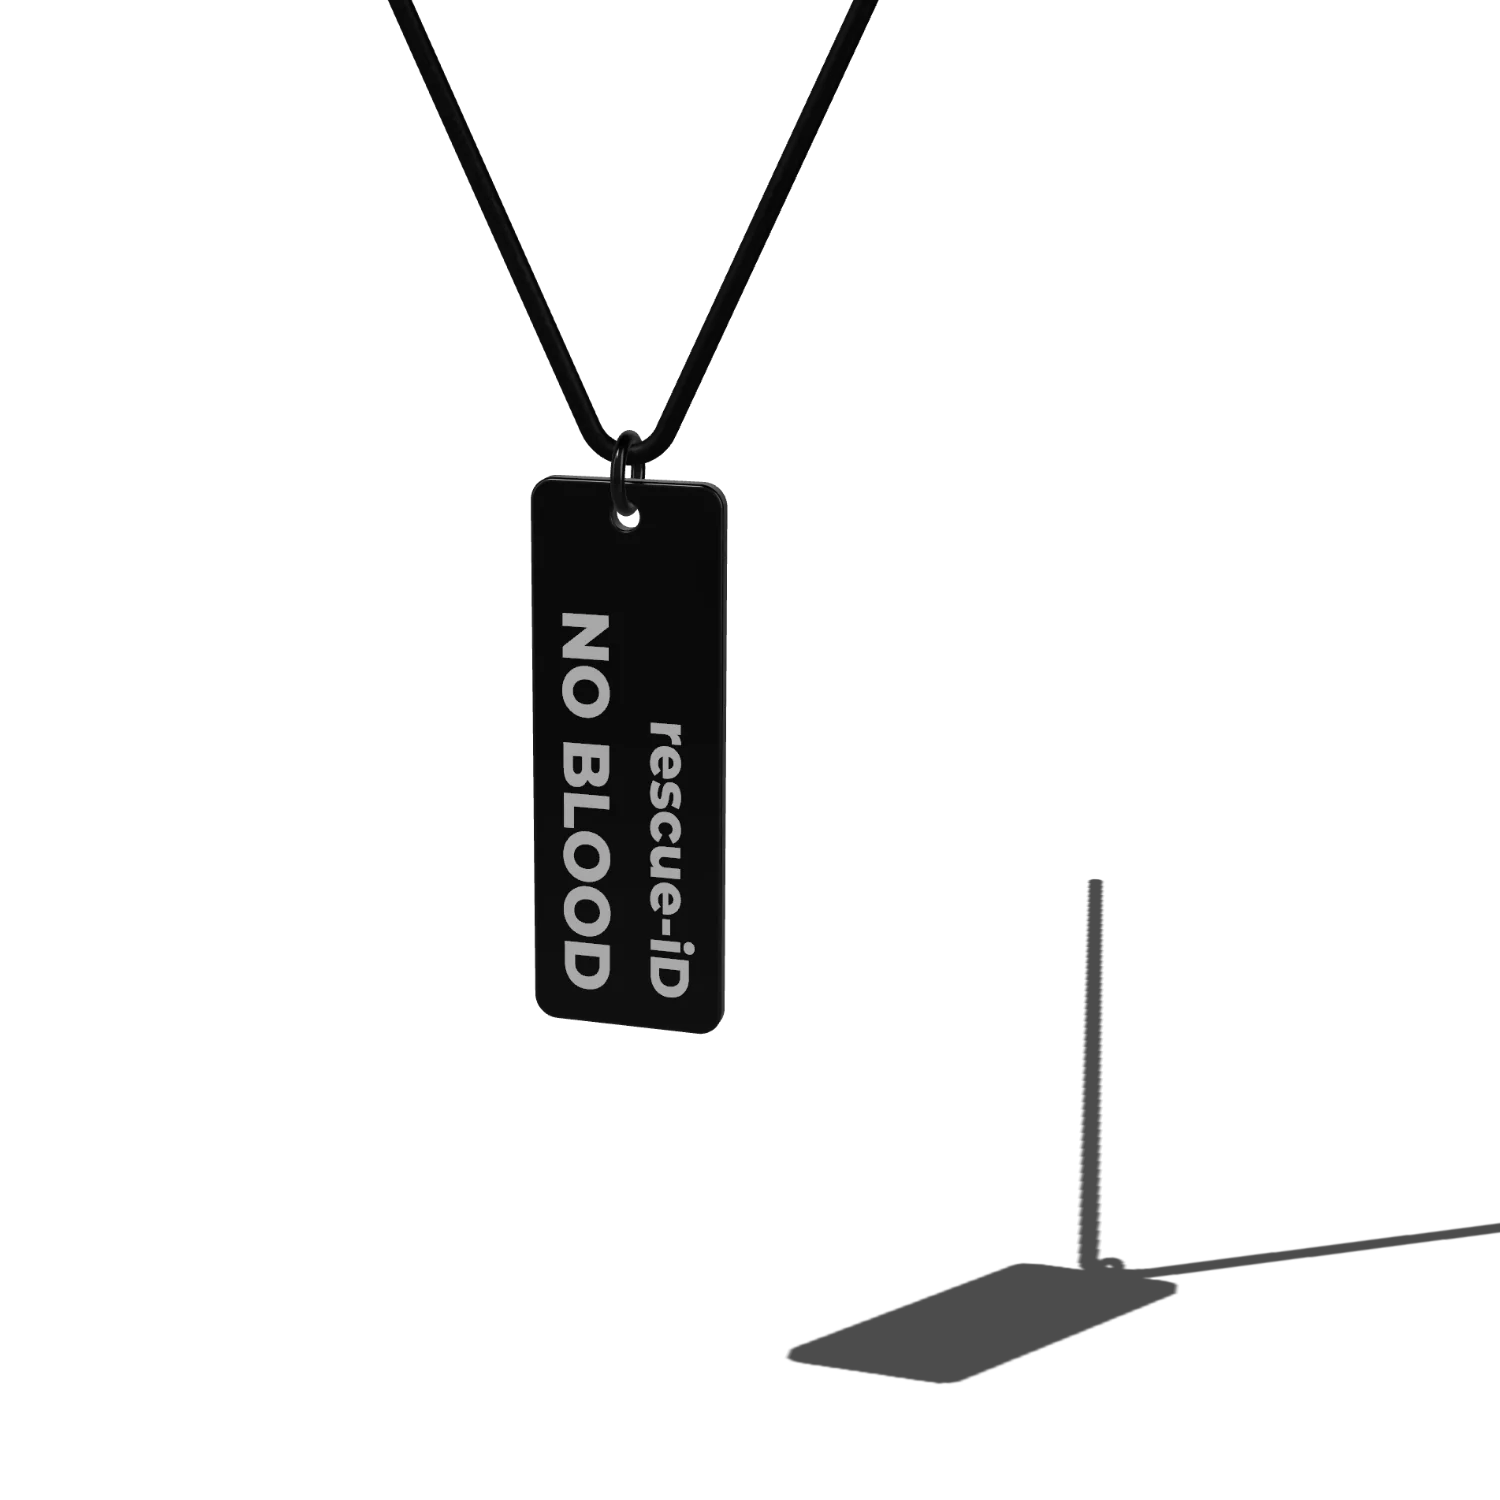 Stainless Steel Pendant with Leather Chain